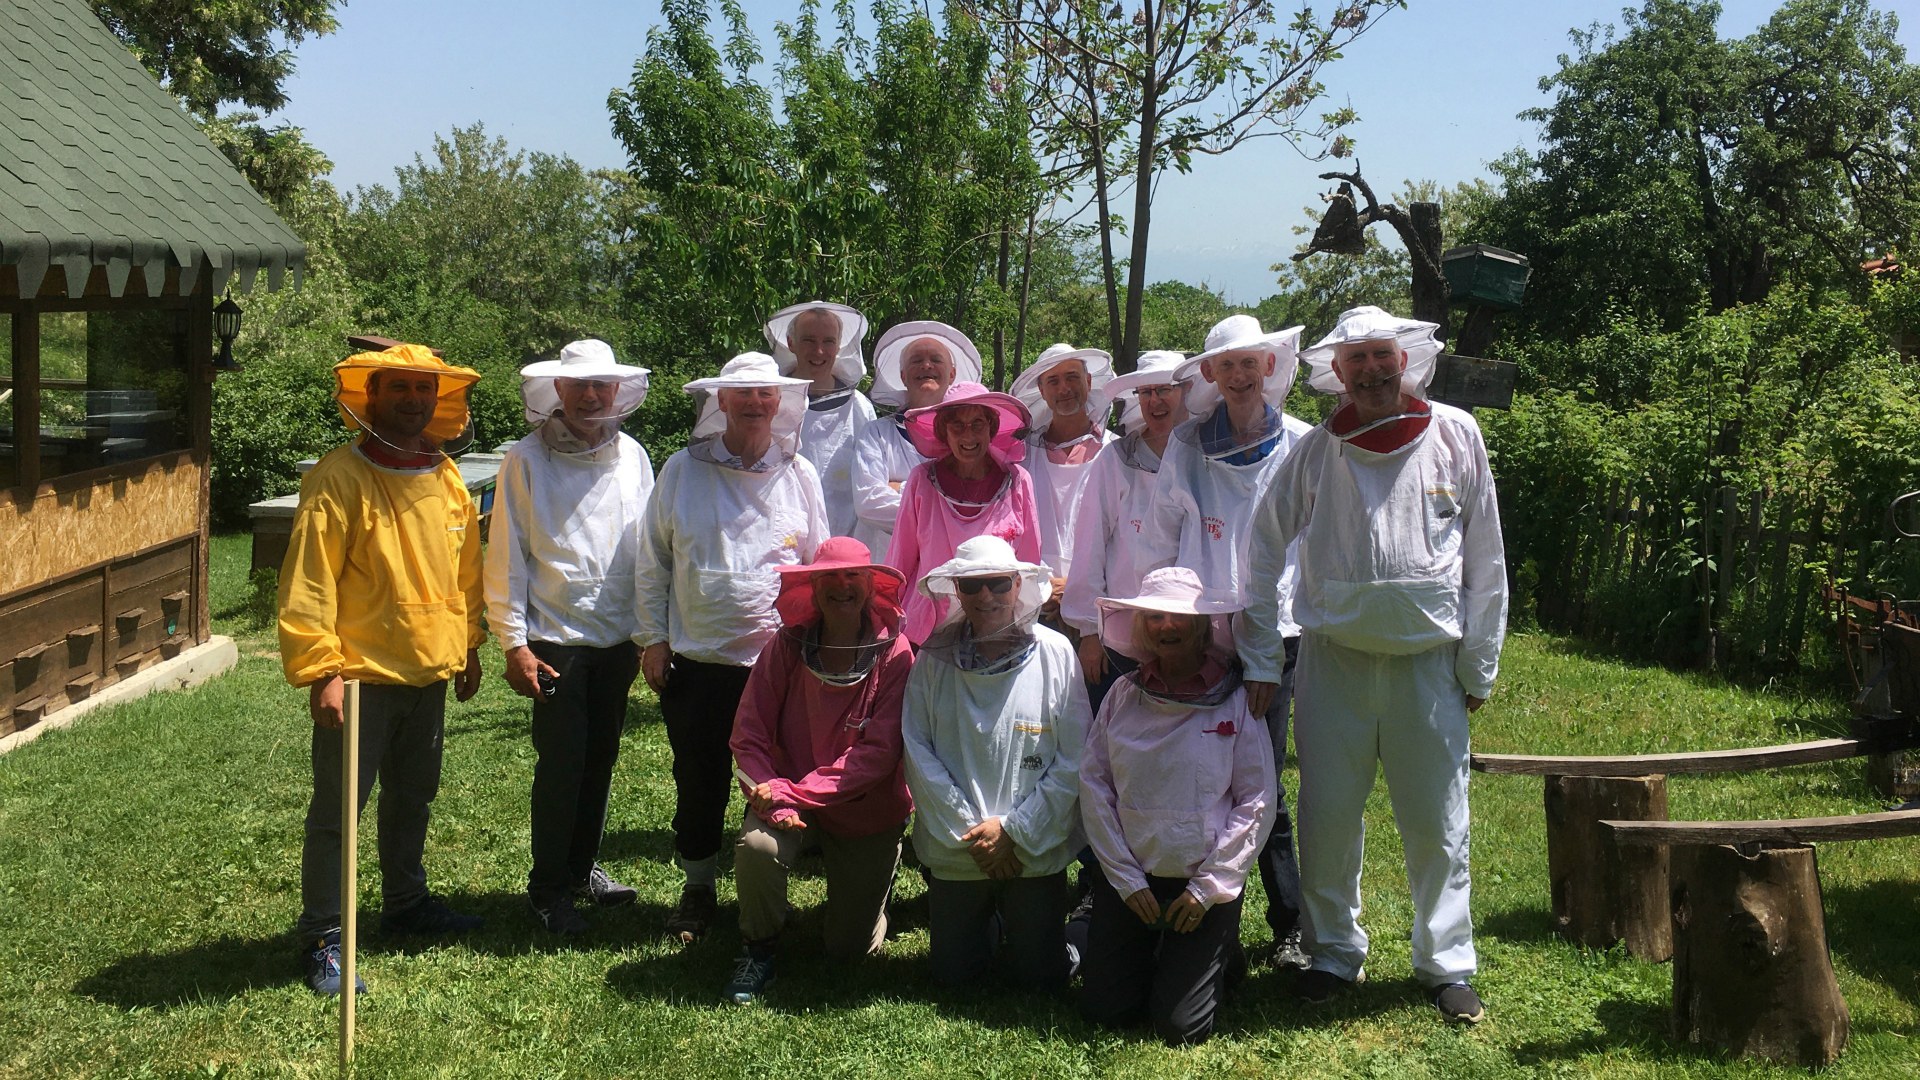 Group in beekeeping outfits, Dihovo, North Macedonia